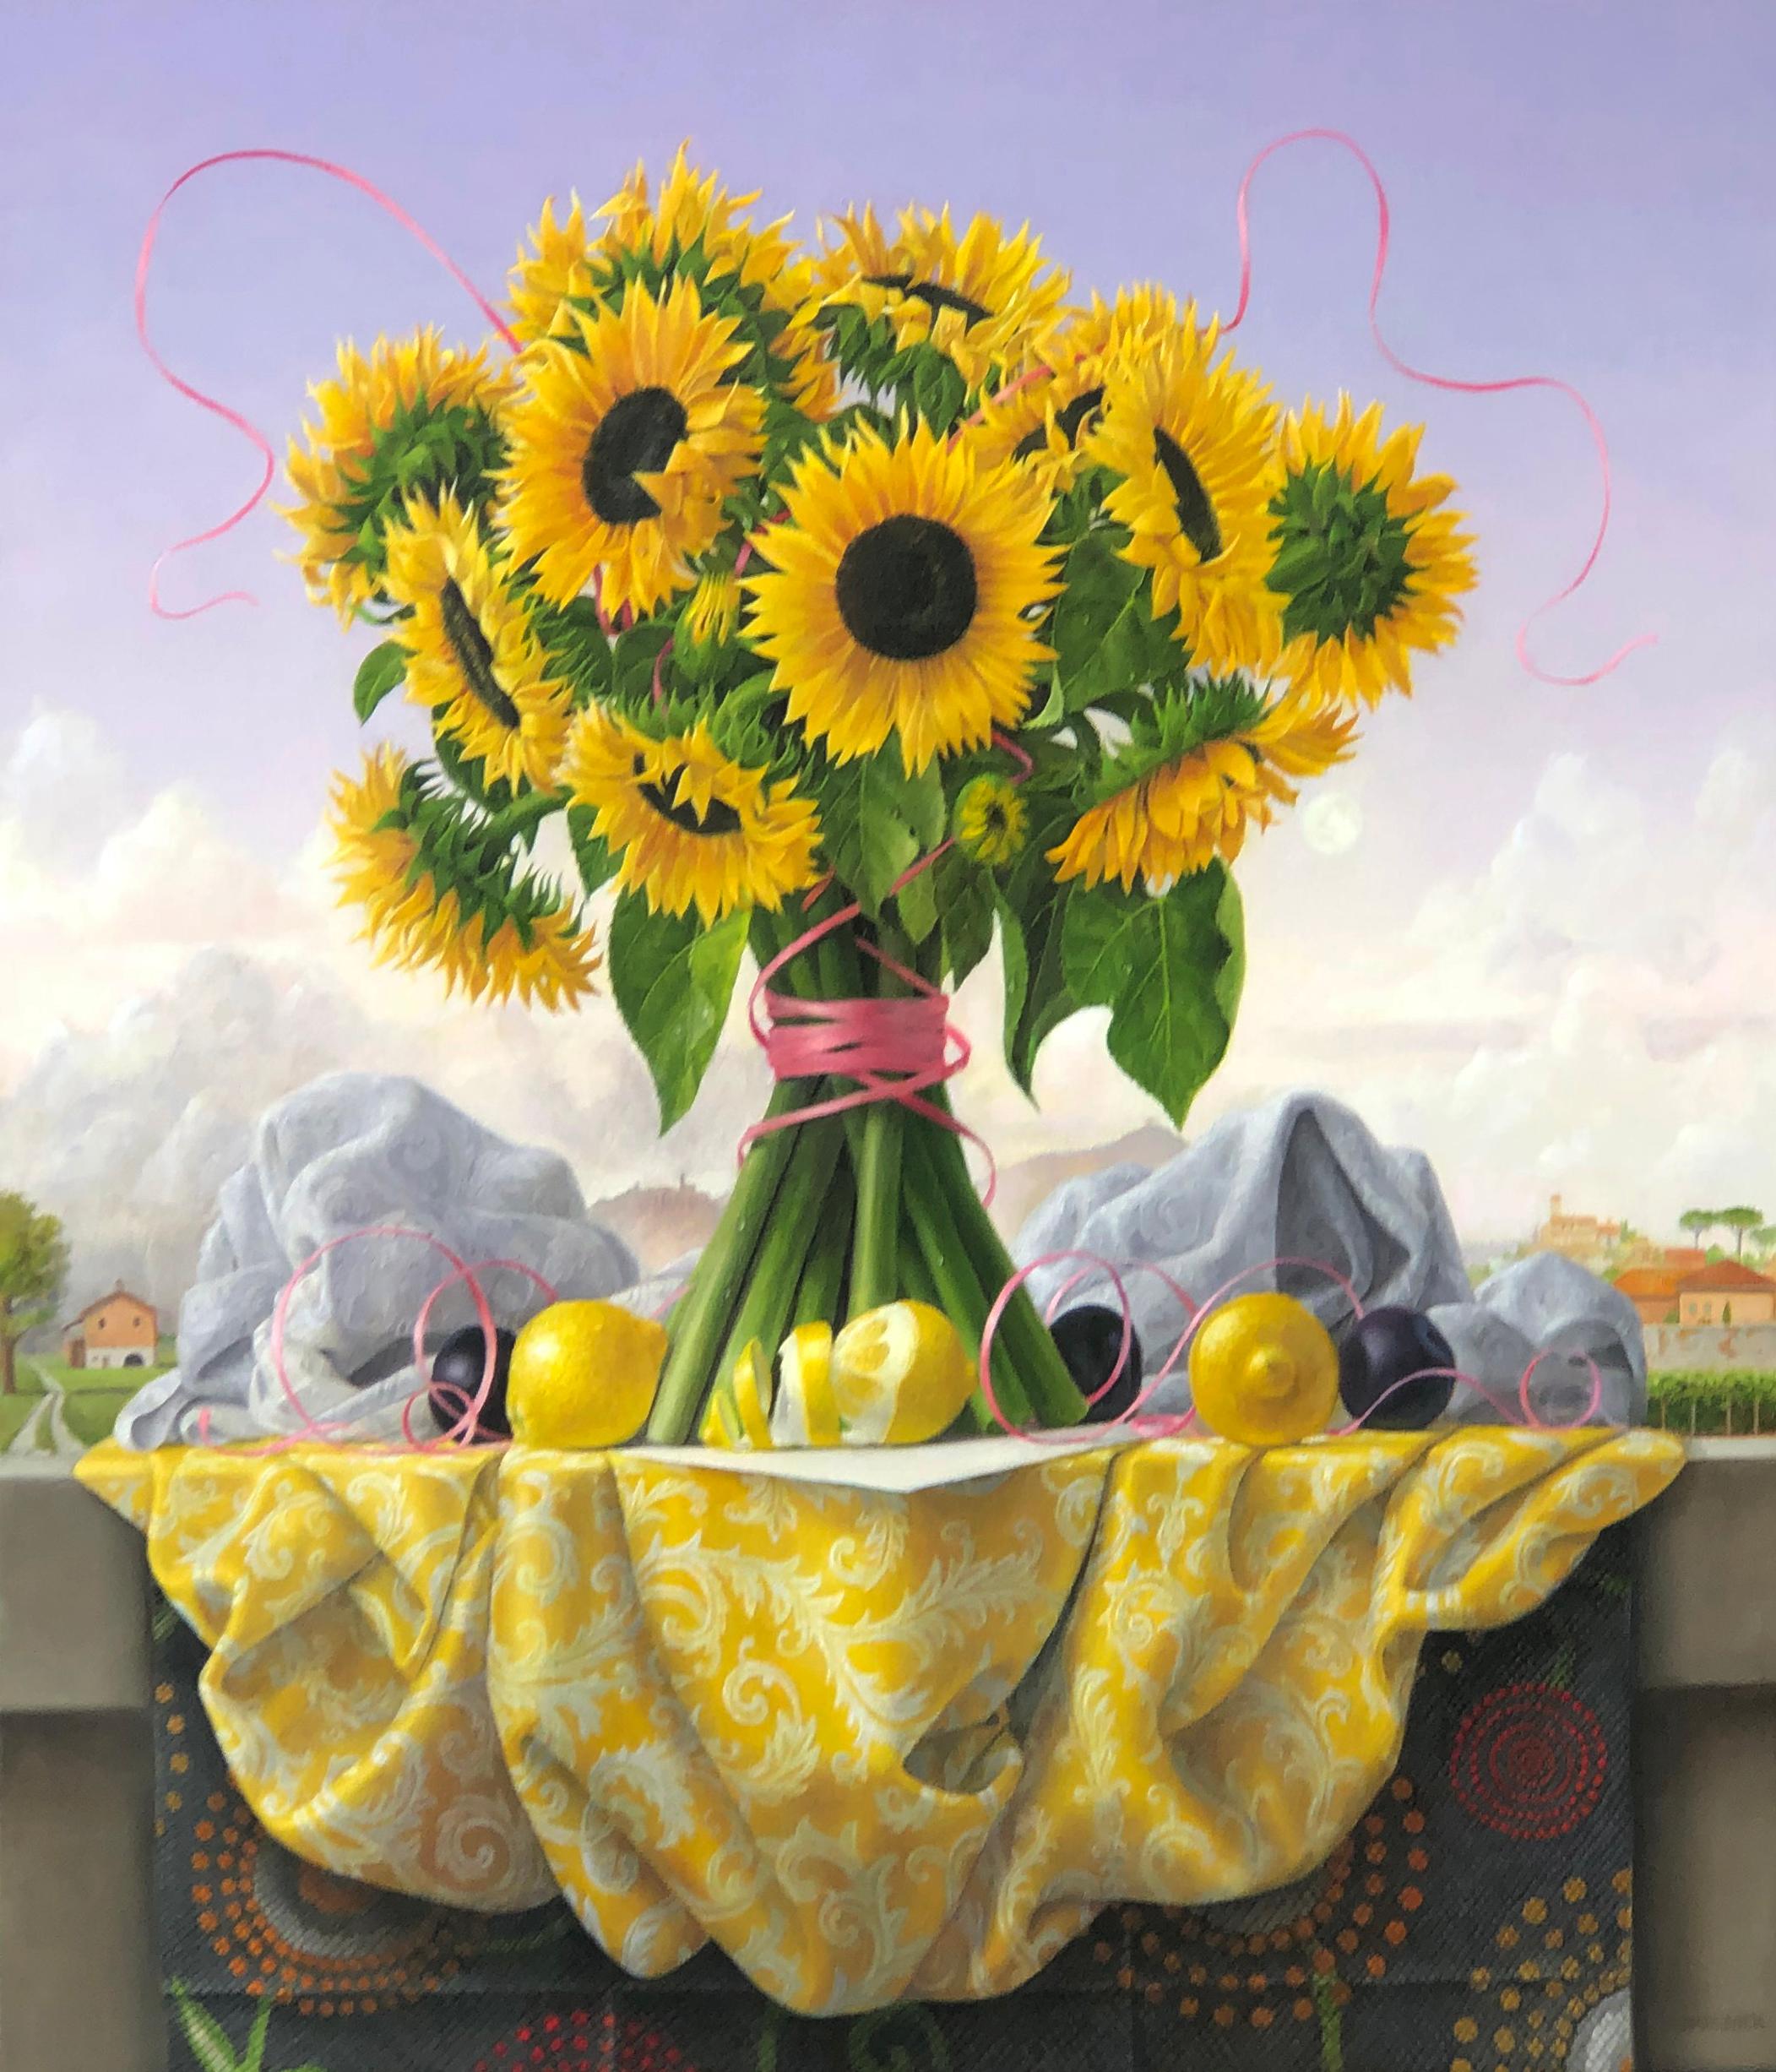 Still Life with Sunflowers. Lemons and Plums